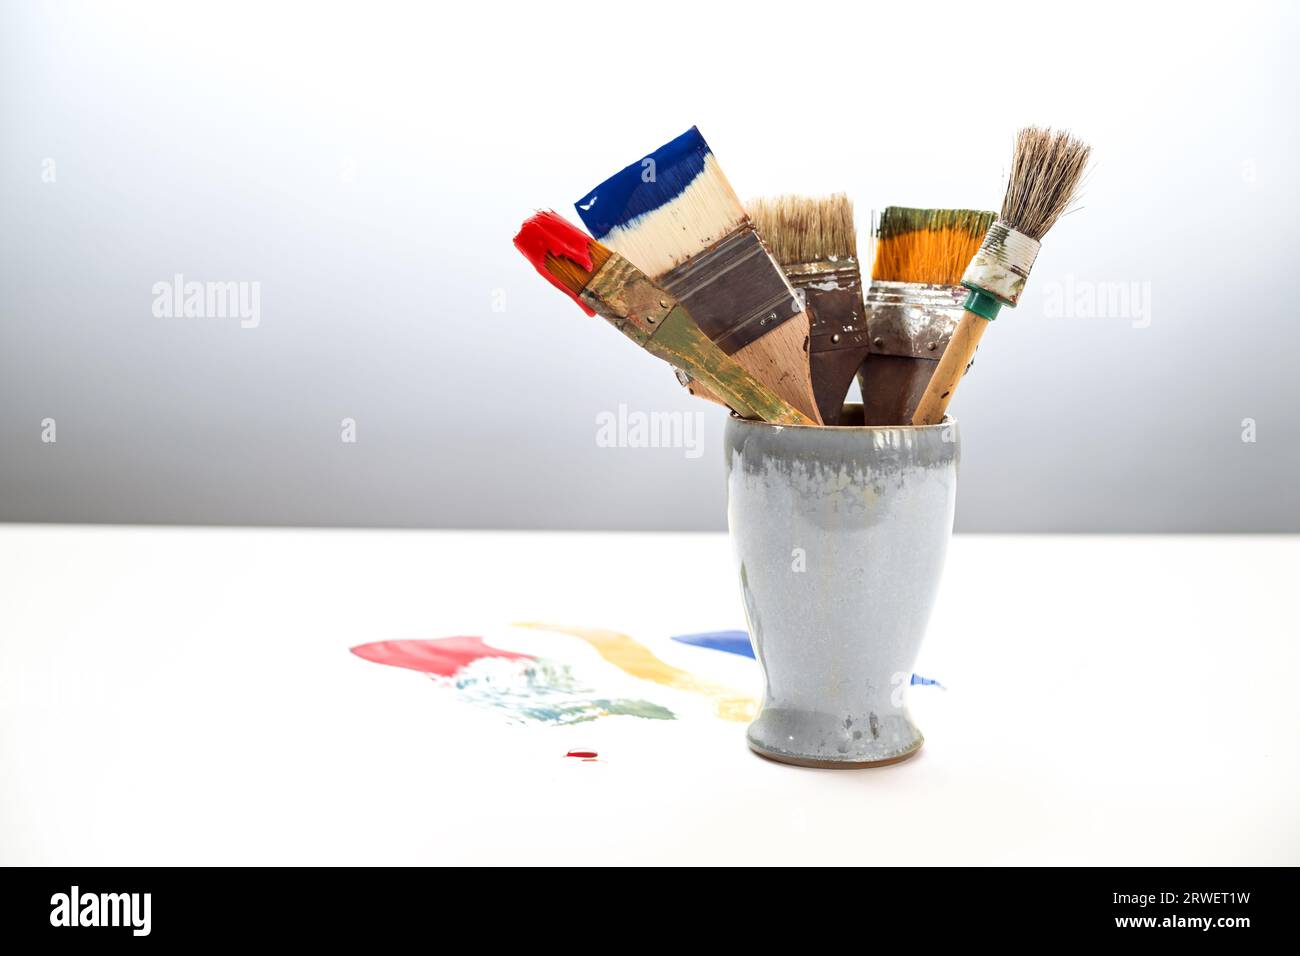 Several used paint brushes with different colors in a ceramic cup and color stains on the white table against a gray background, copy space, selected Stock Photo